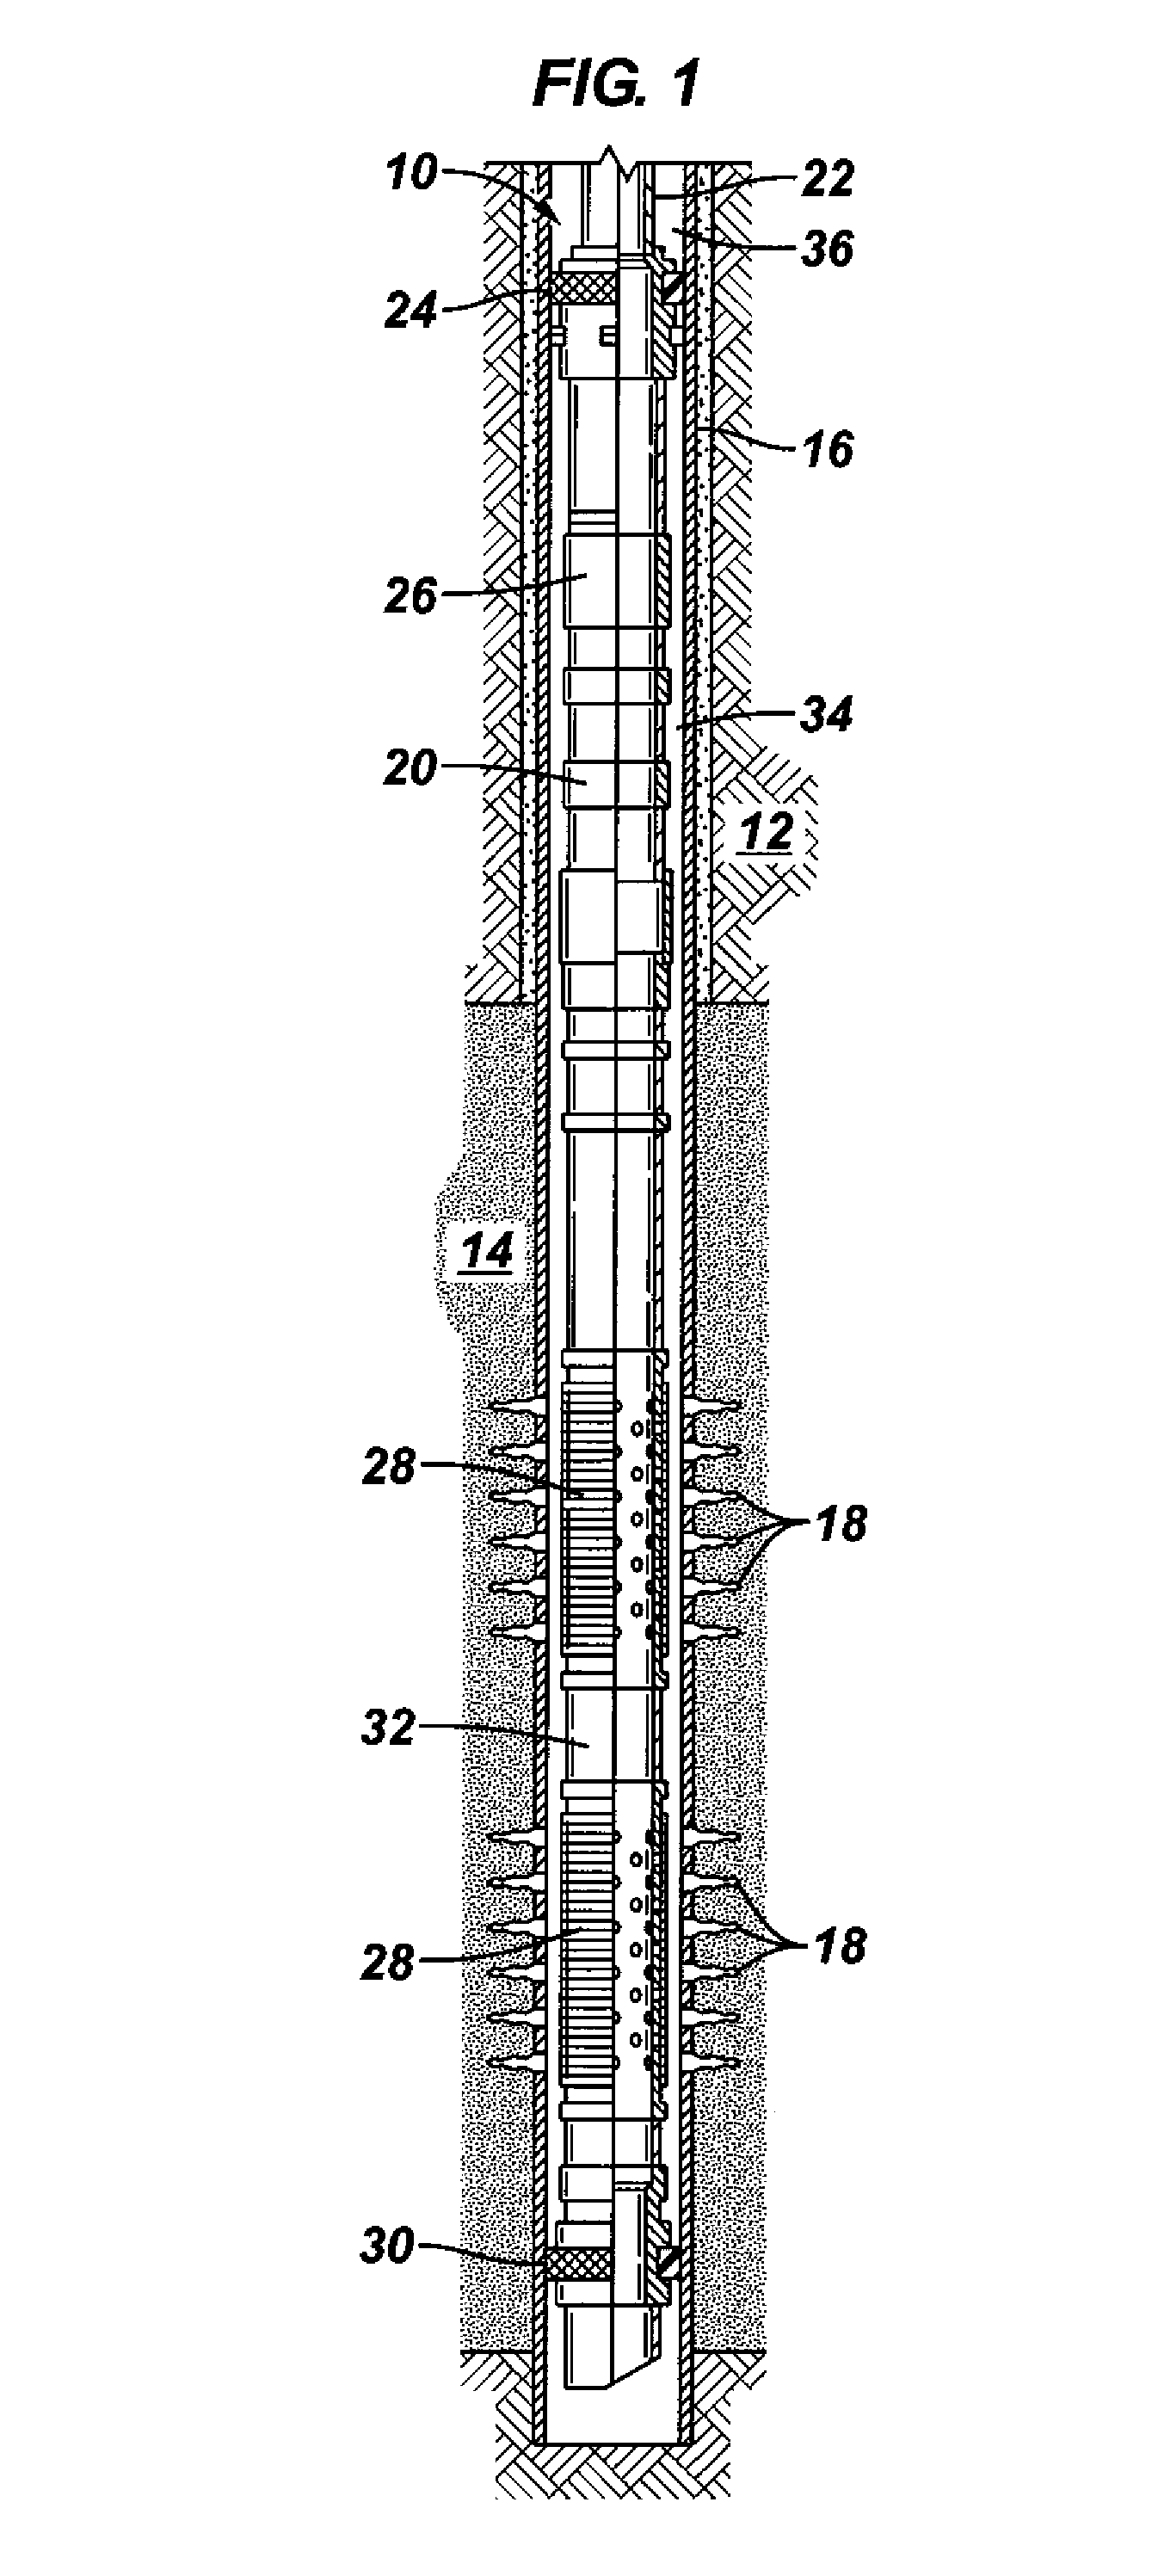 Well servicing methods and systems employing a triggerable filter medium sealing composition